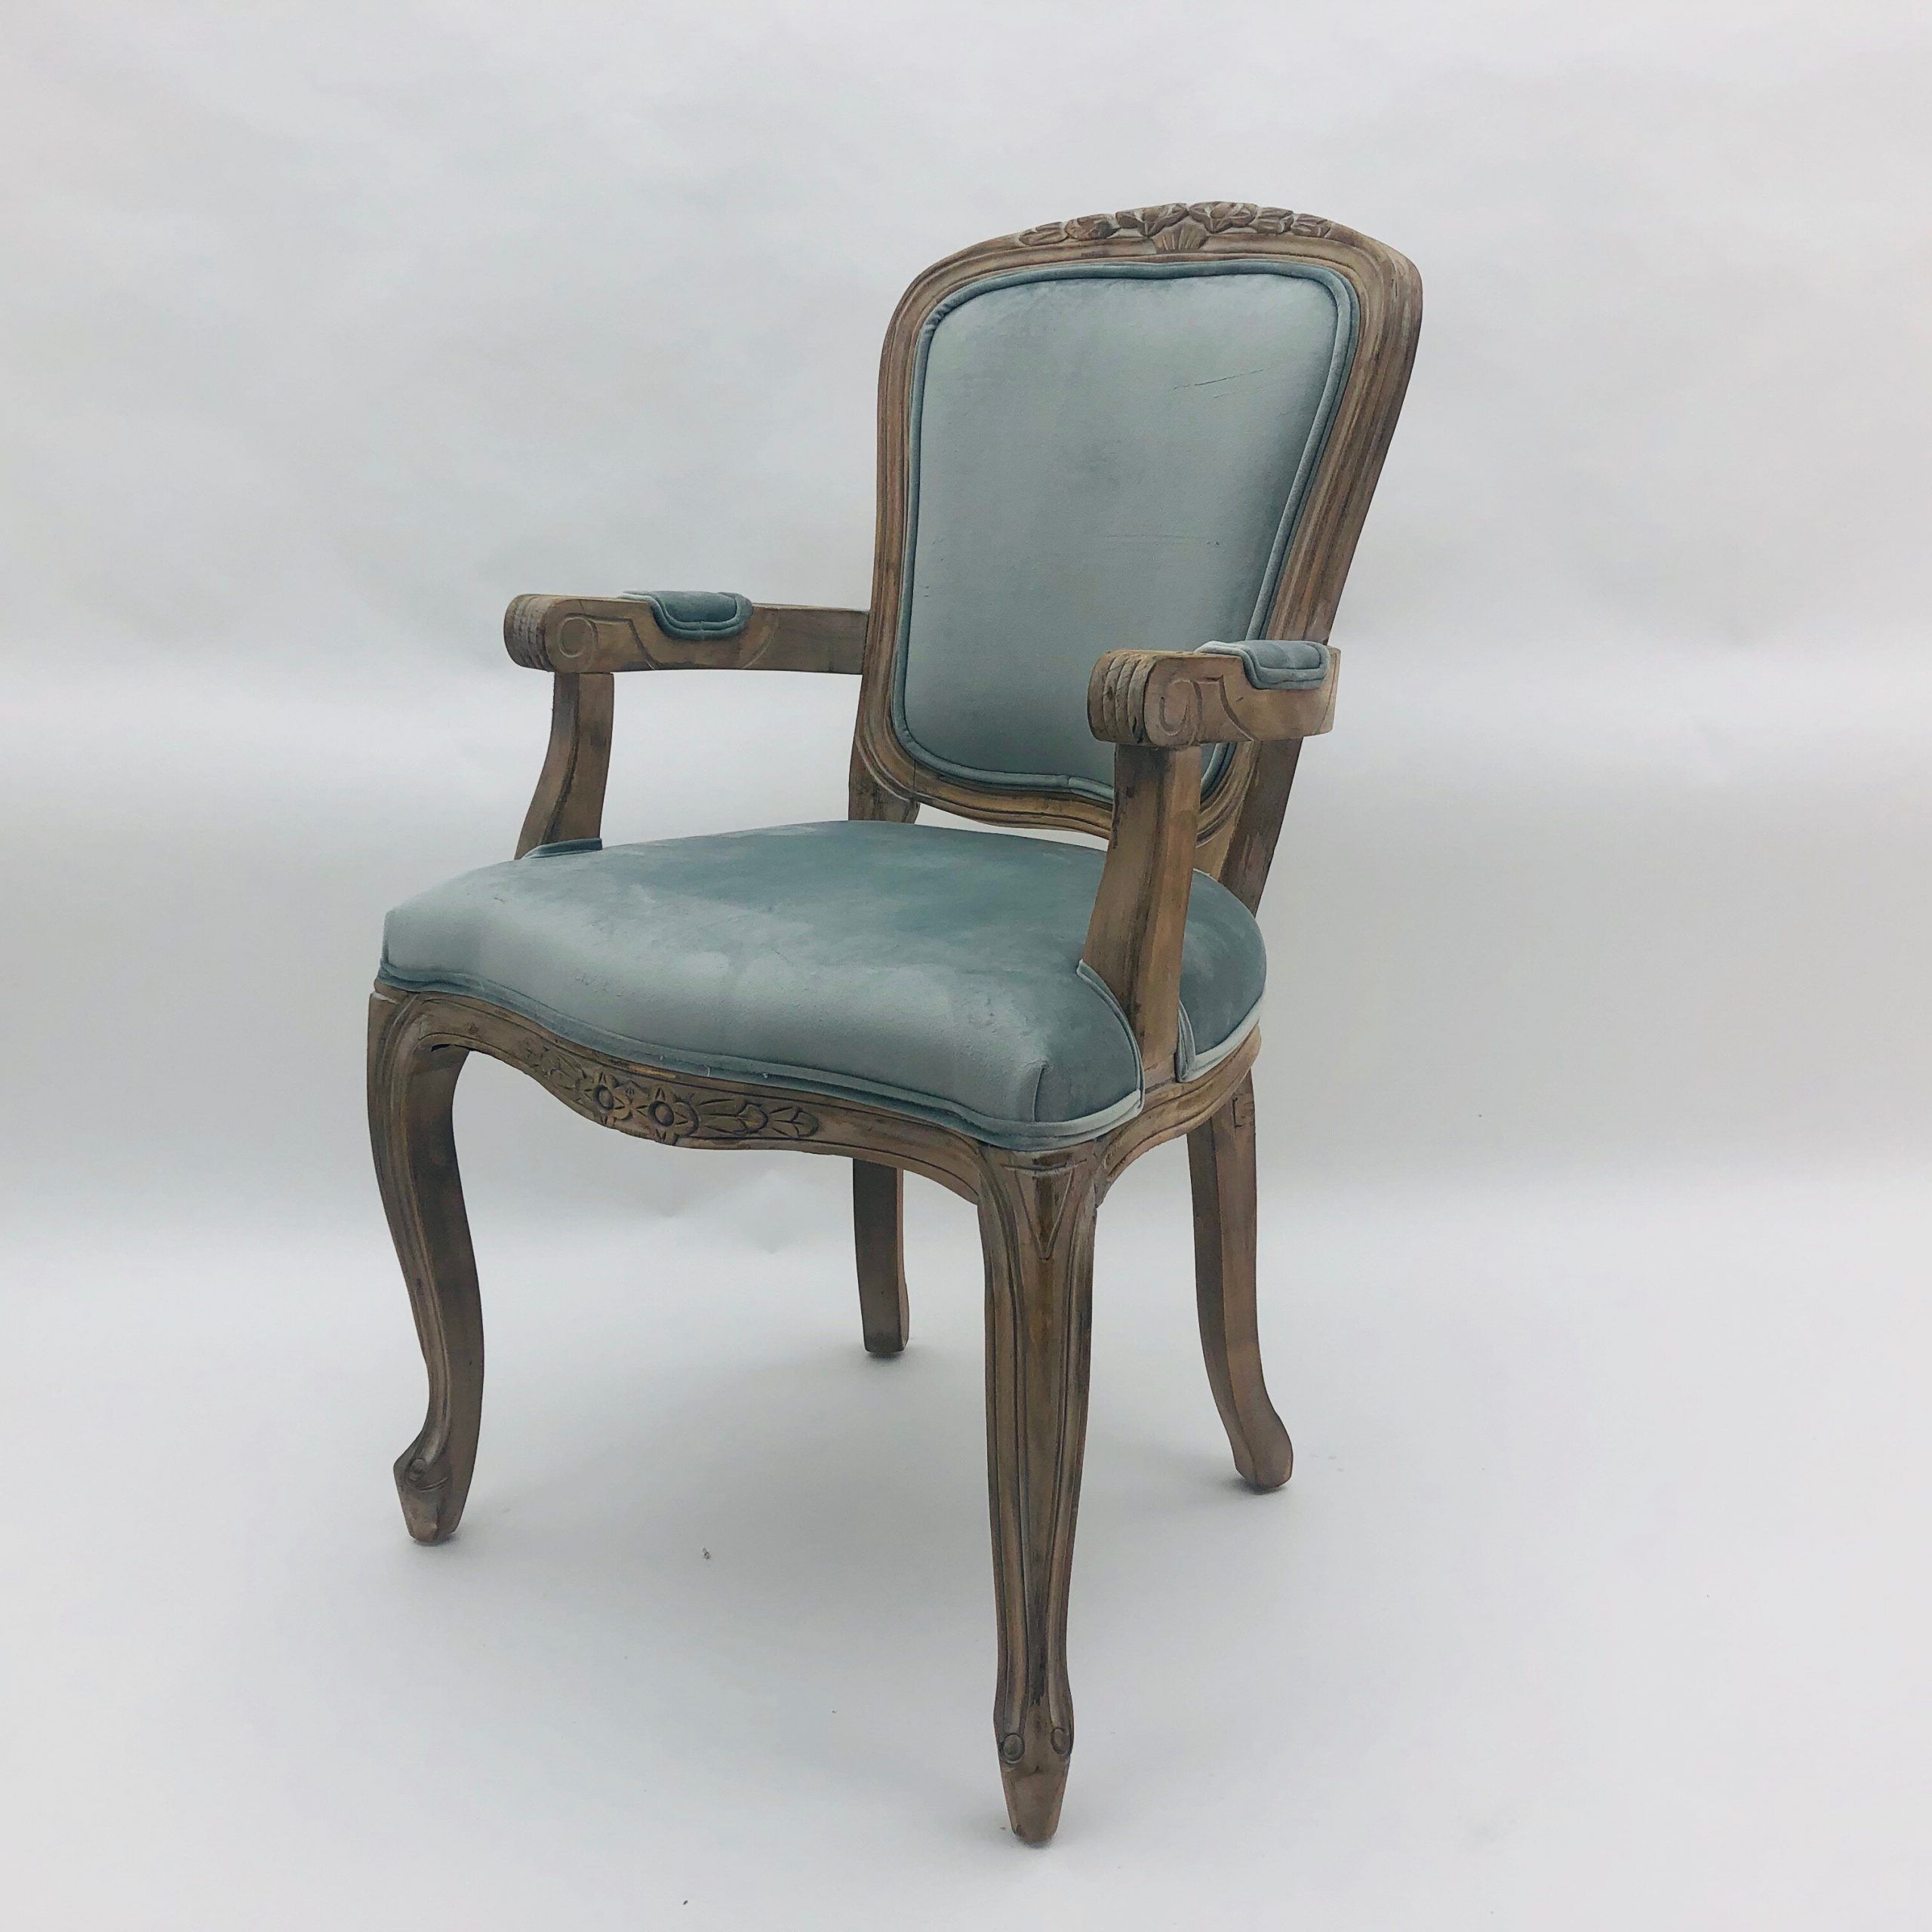 Haleigh Armchairs With Preferred Haleigh Upholstered Dining Chair (View 6 of 20)